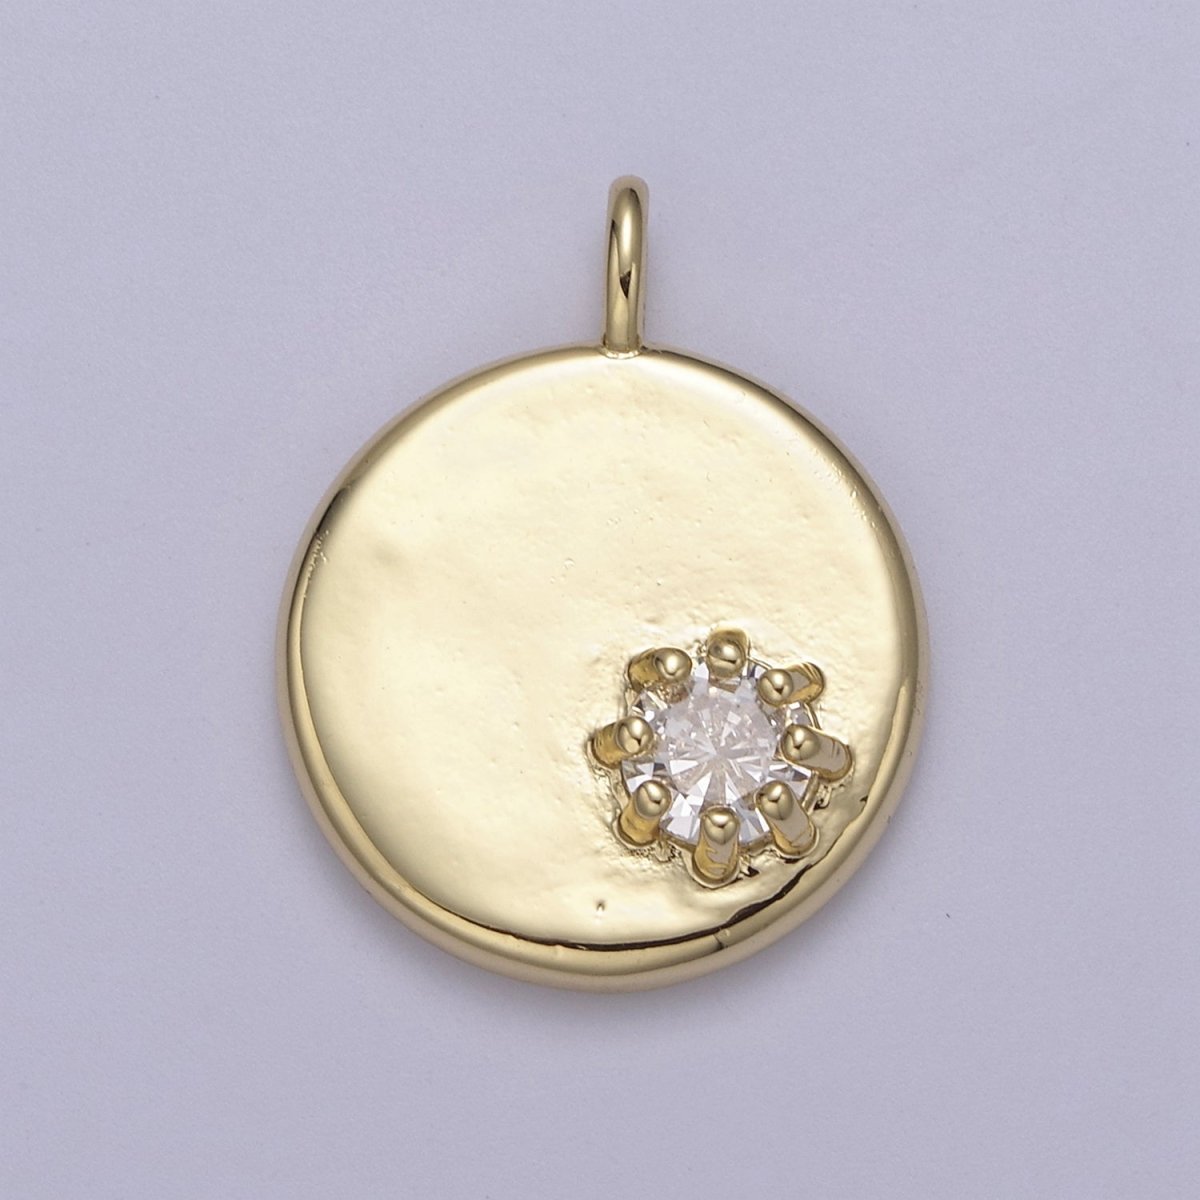 Dainty Coin Charm With Color Cz Stone for Necklace Bracelet Supply H-531 H-537 H-538 H-540 - DLUXCA